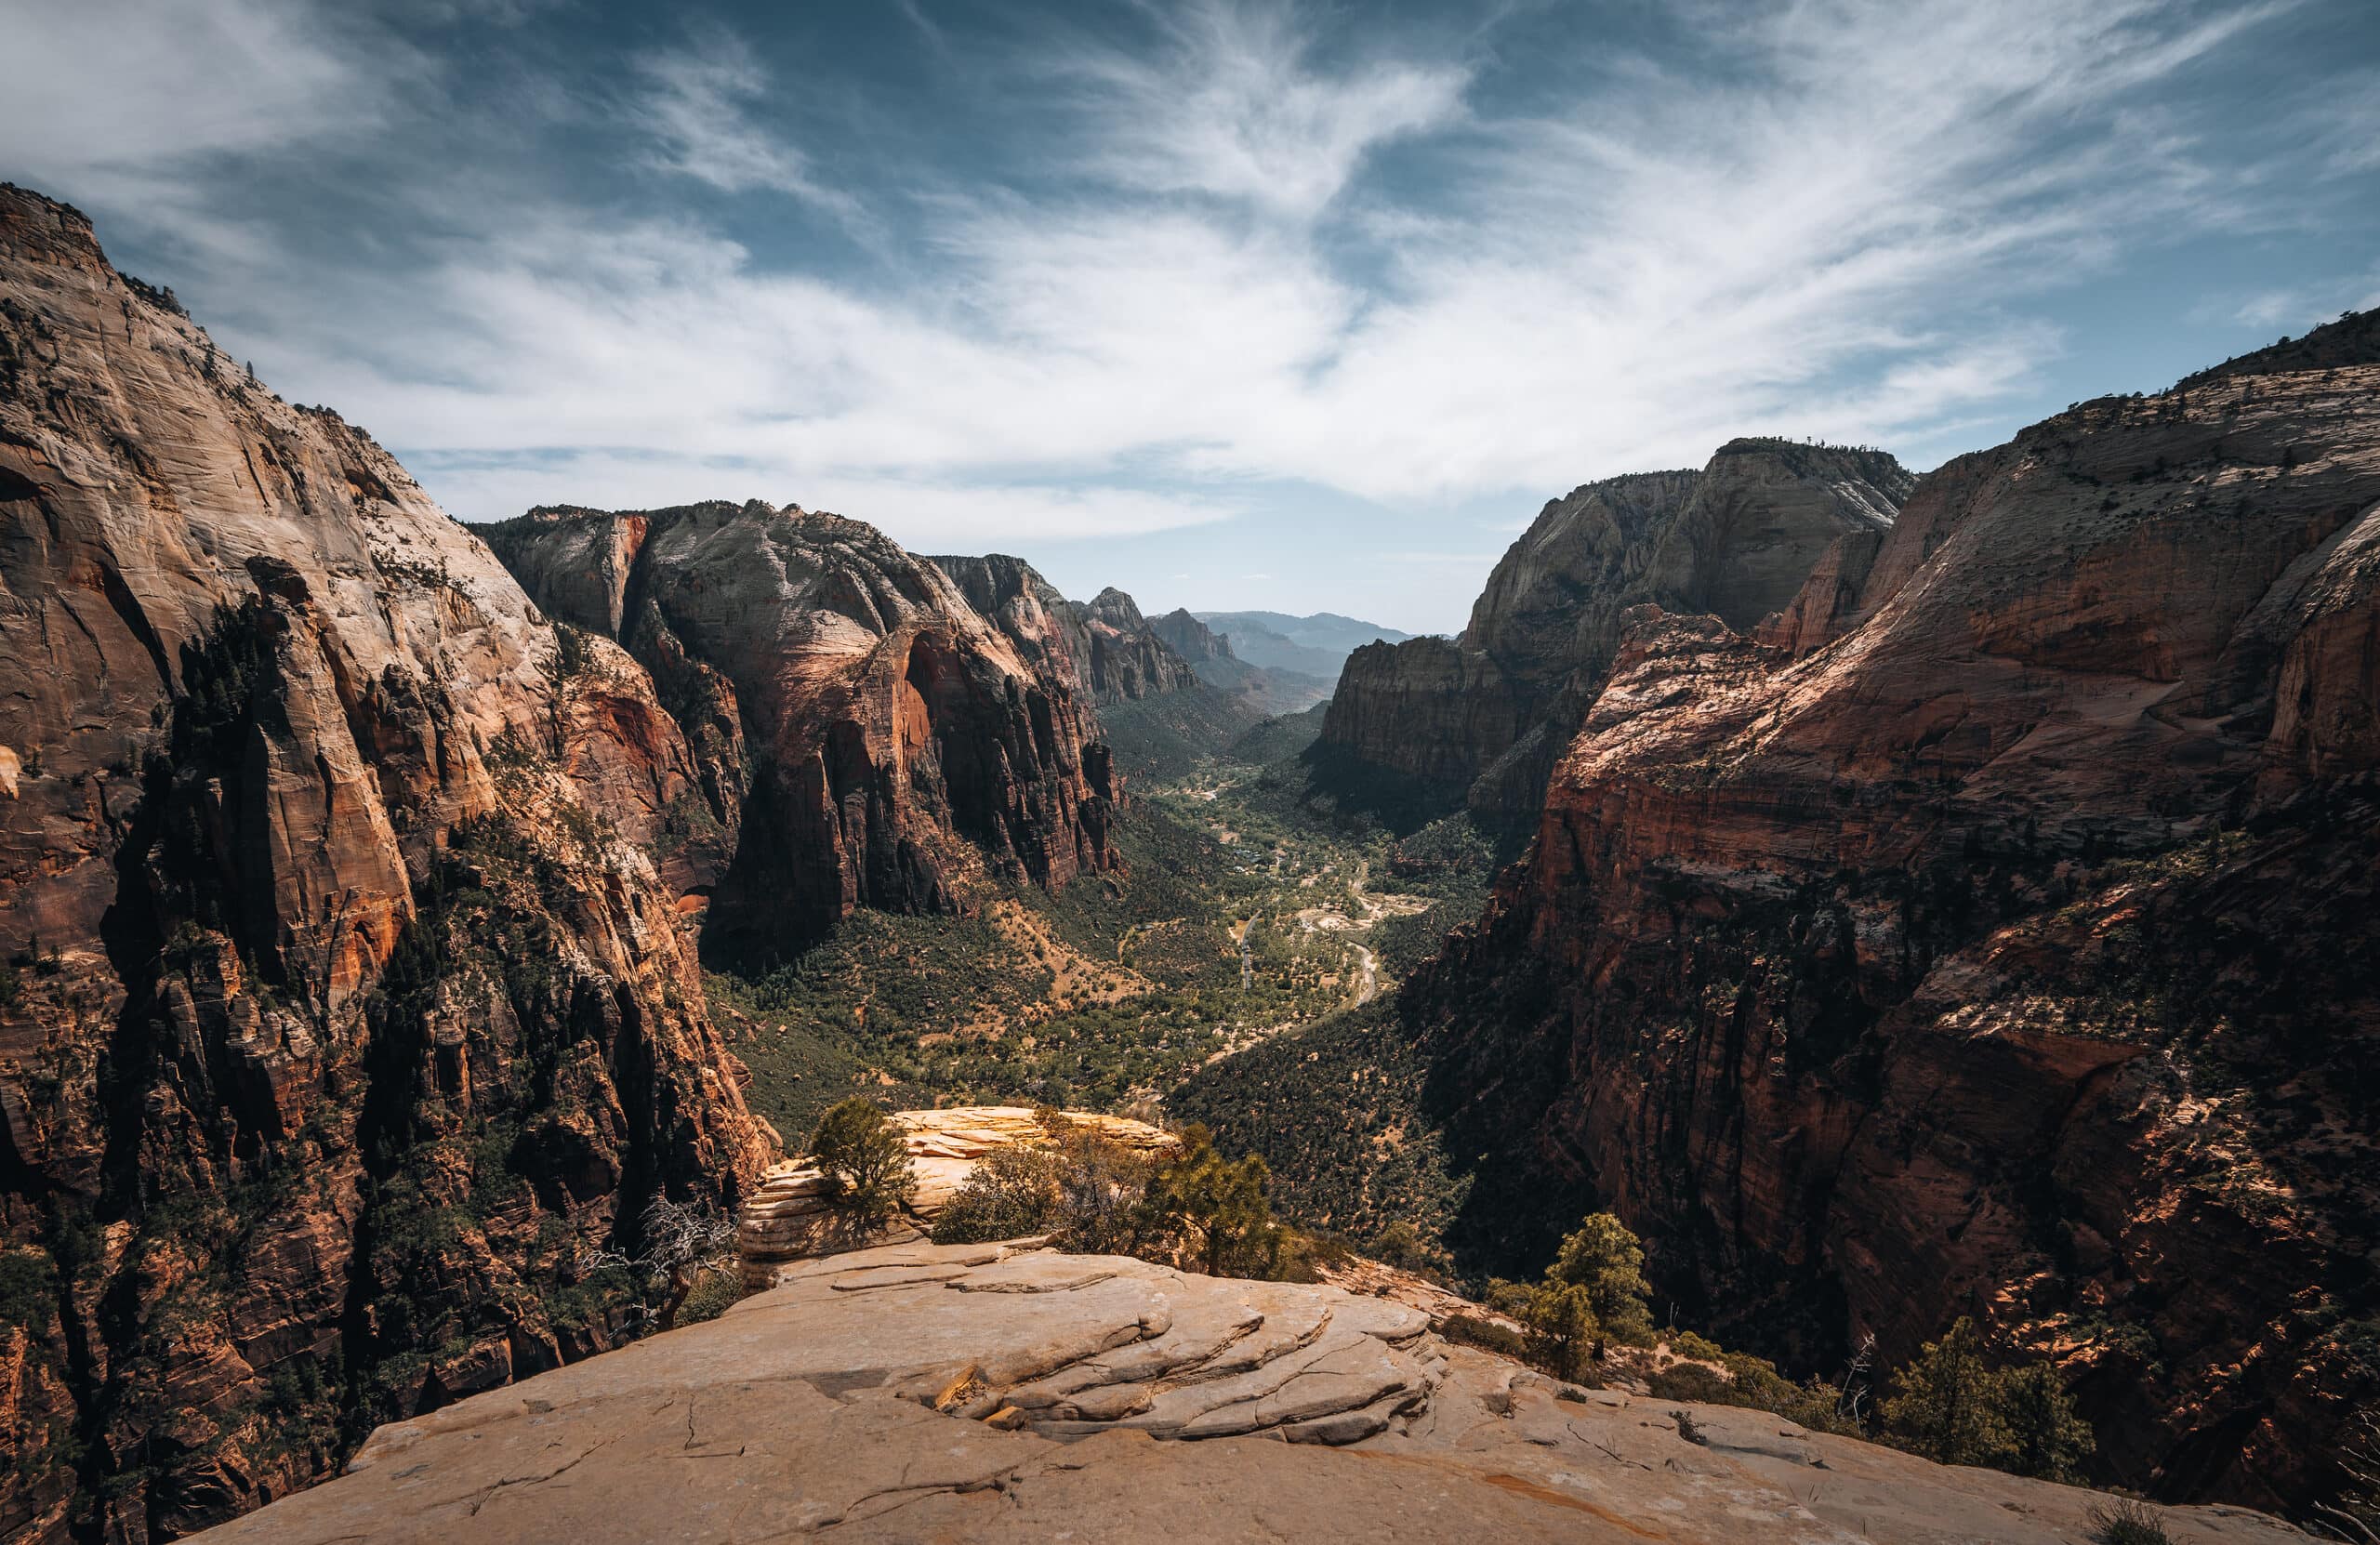 A breathtaking view of Zion Canyon in Utah. Towering red rock cliffs surround a winding river, with lush vegetation dotting the landscape. The clear blue skies add an extra touch of beauty to the scene. Zion Canyon is known for its stunning natural beauty, popular hiking trails, and unique rock formations such as the famous Angel's Landing and The Narrows.